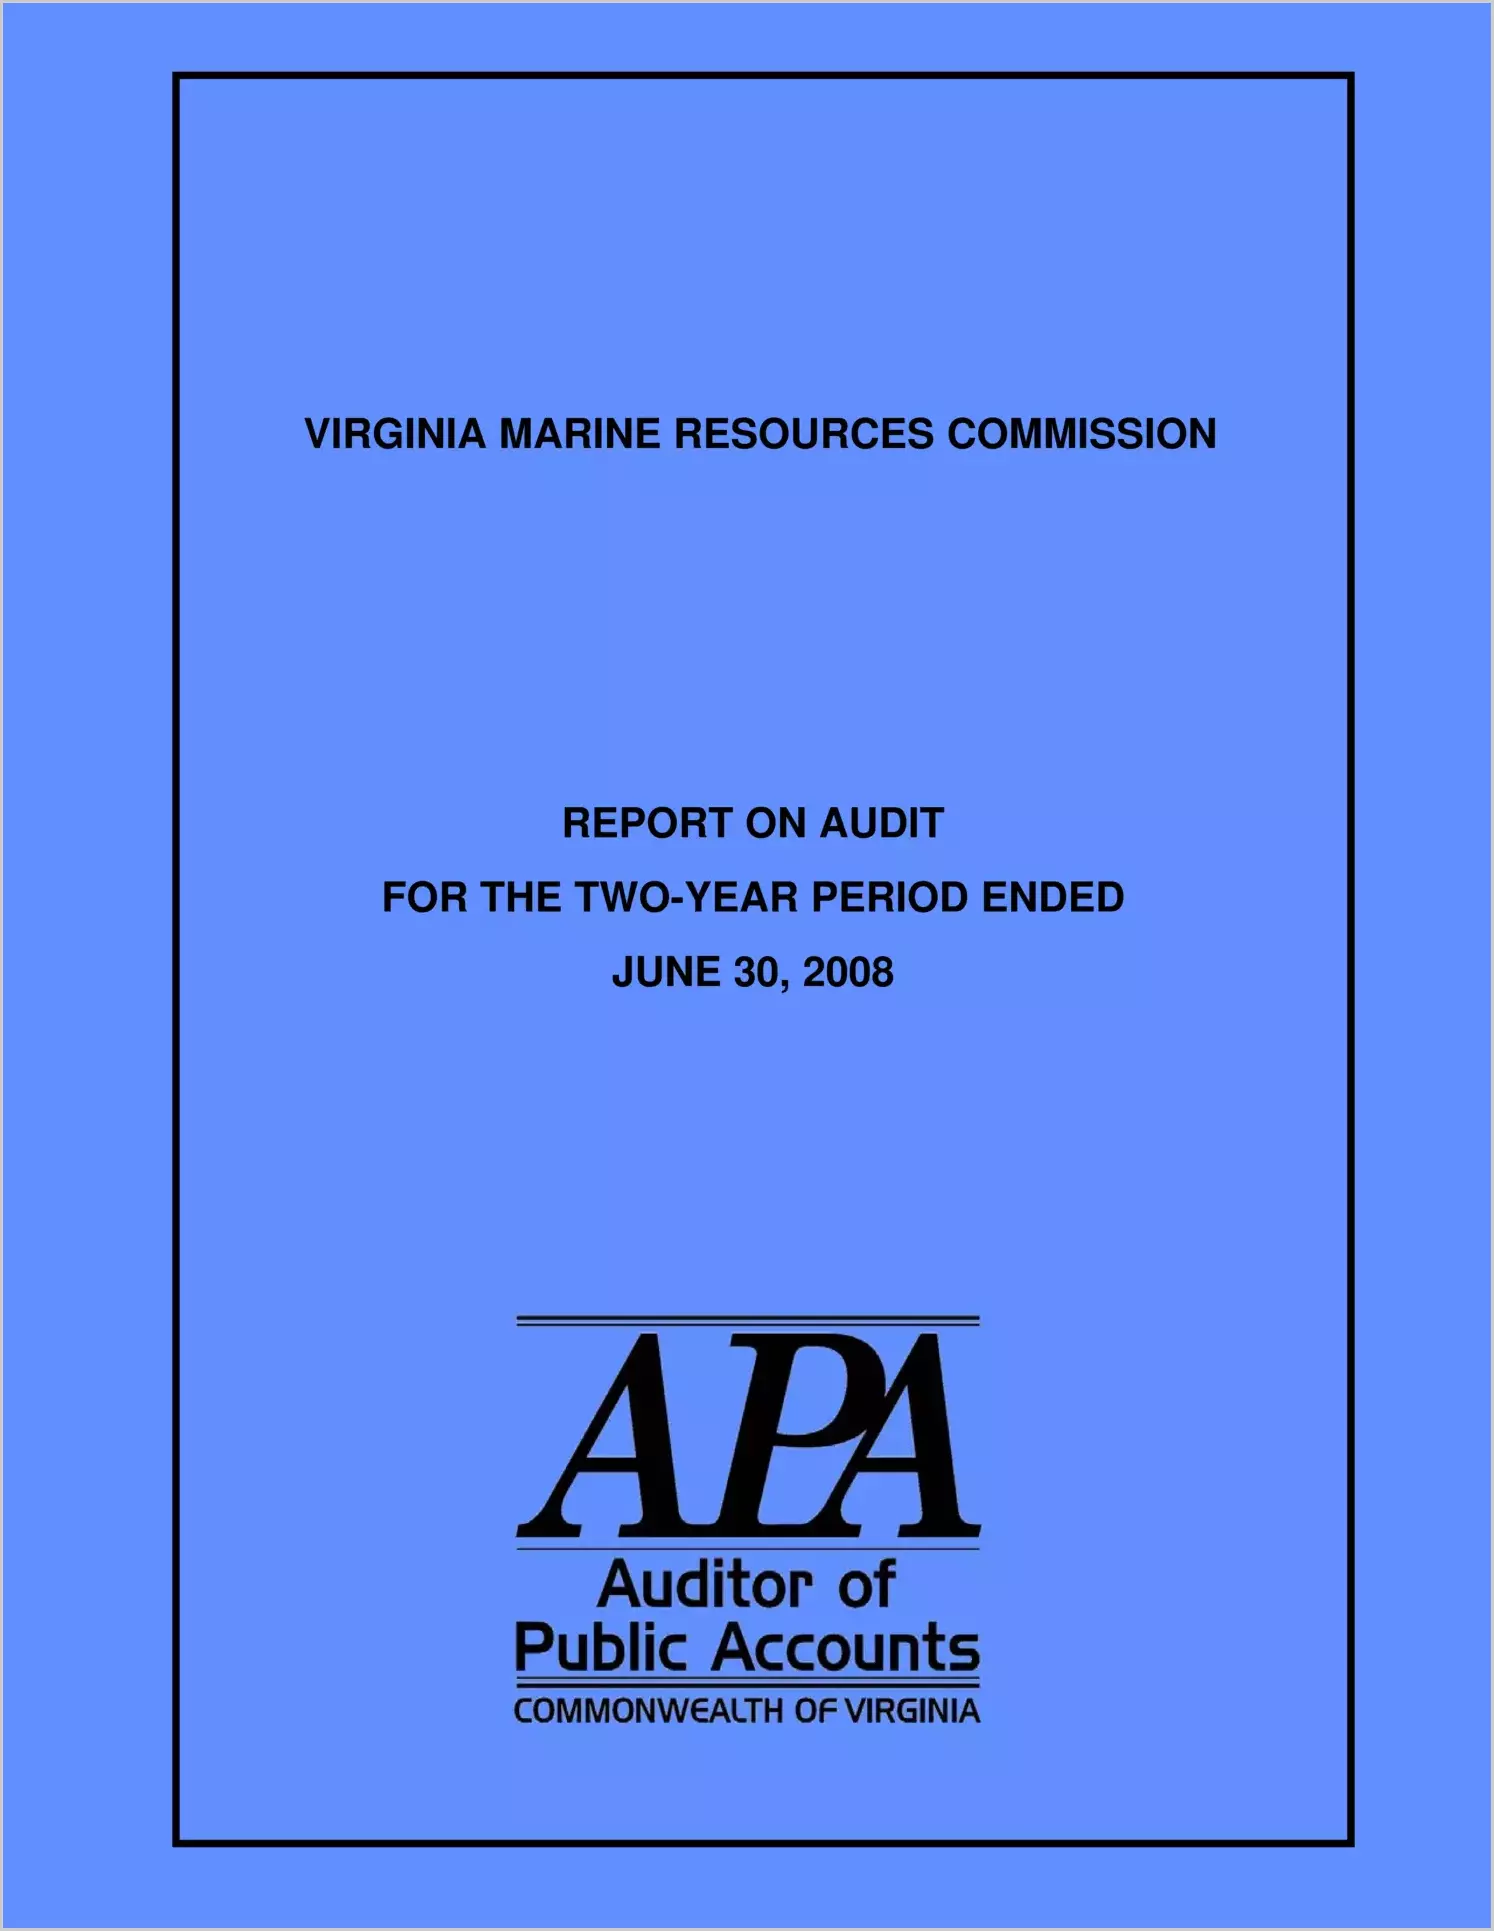 Virginia Marine Resources Commission Report on Audit for two-year period ended June 30, 2008